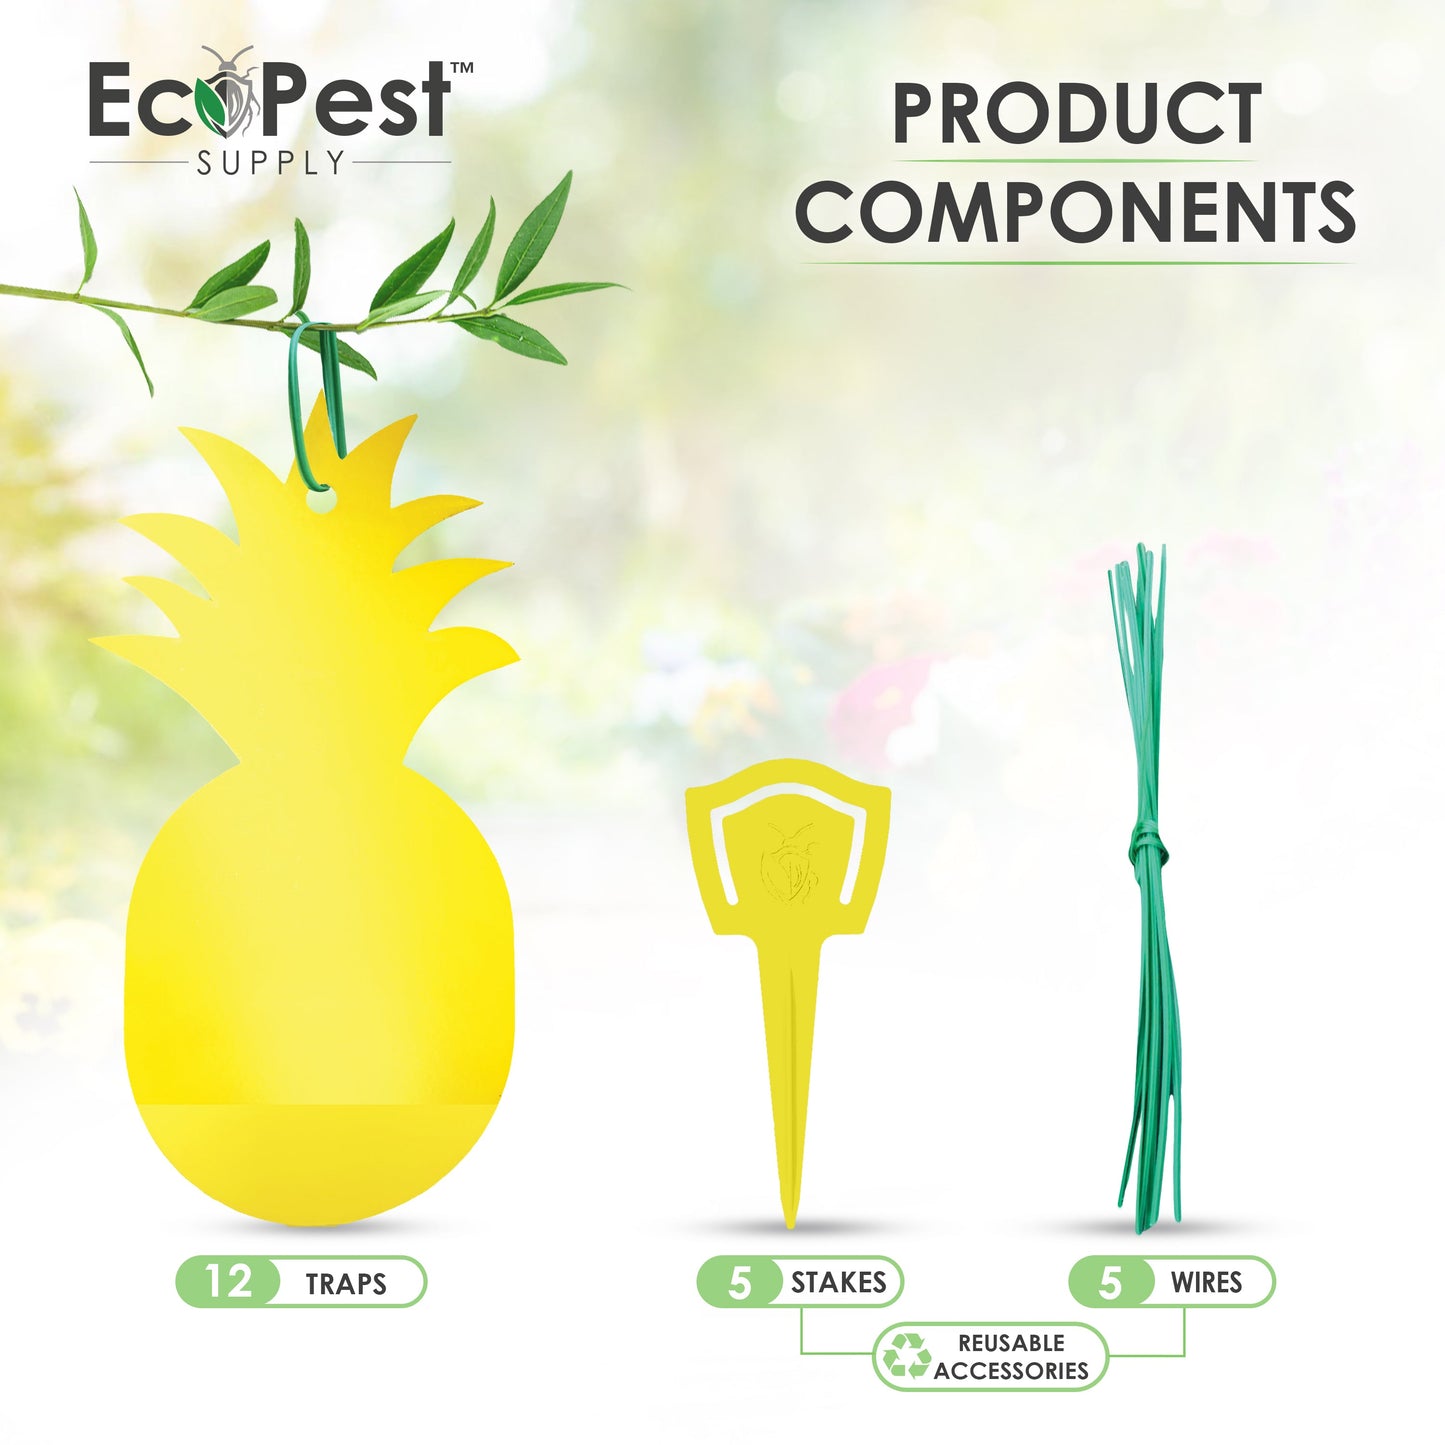 Sticky Fly Traps (Yellow) — 12 Pack by EcoPest Supply